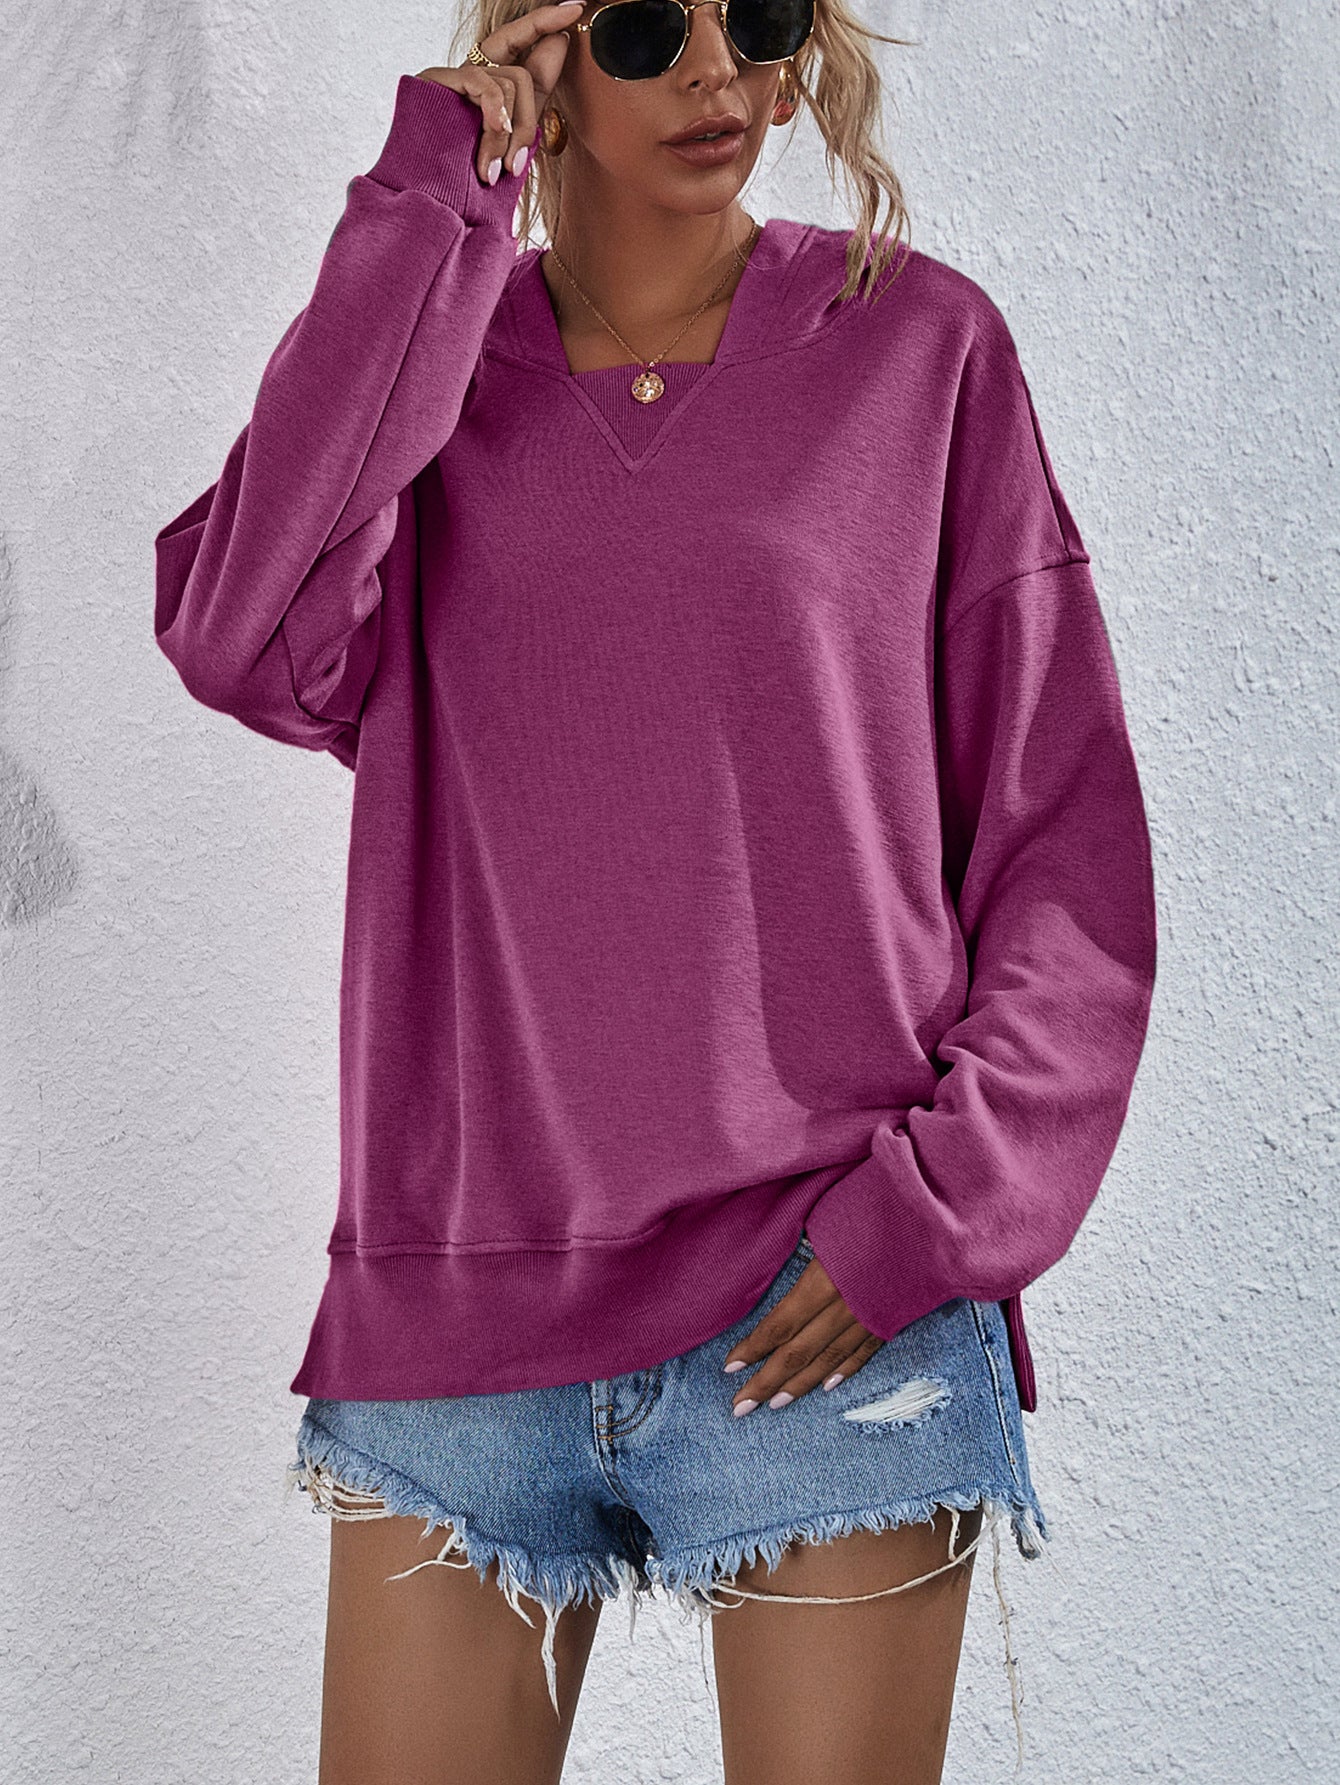 Women's Hoodie Sweatshirt Sports Casual Candy Color Long Sleeve Tops Clothes